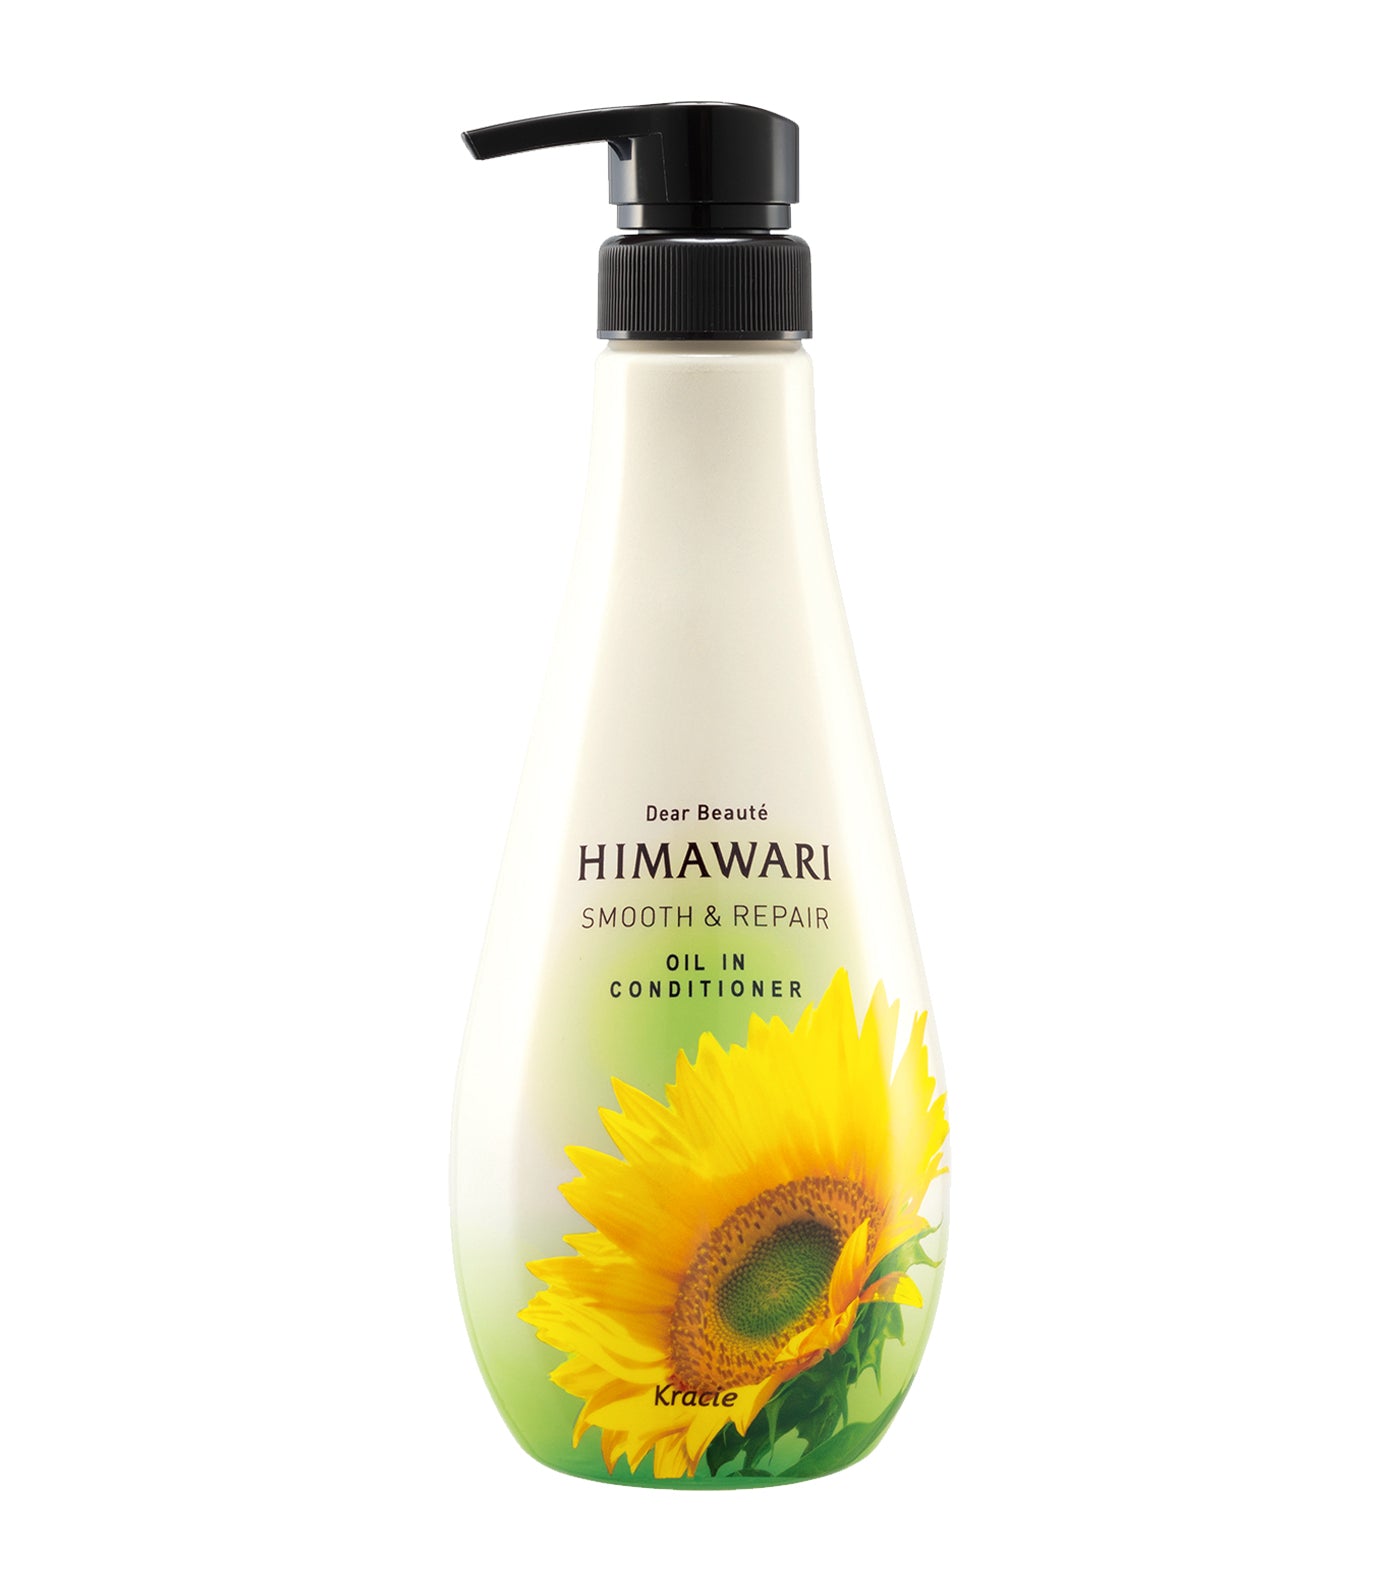 Dear Beaute Himawari Smooth and Repair Oil in Conditioner